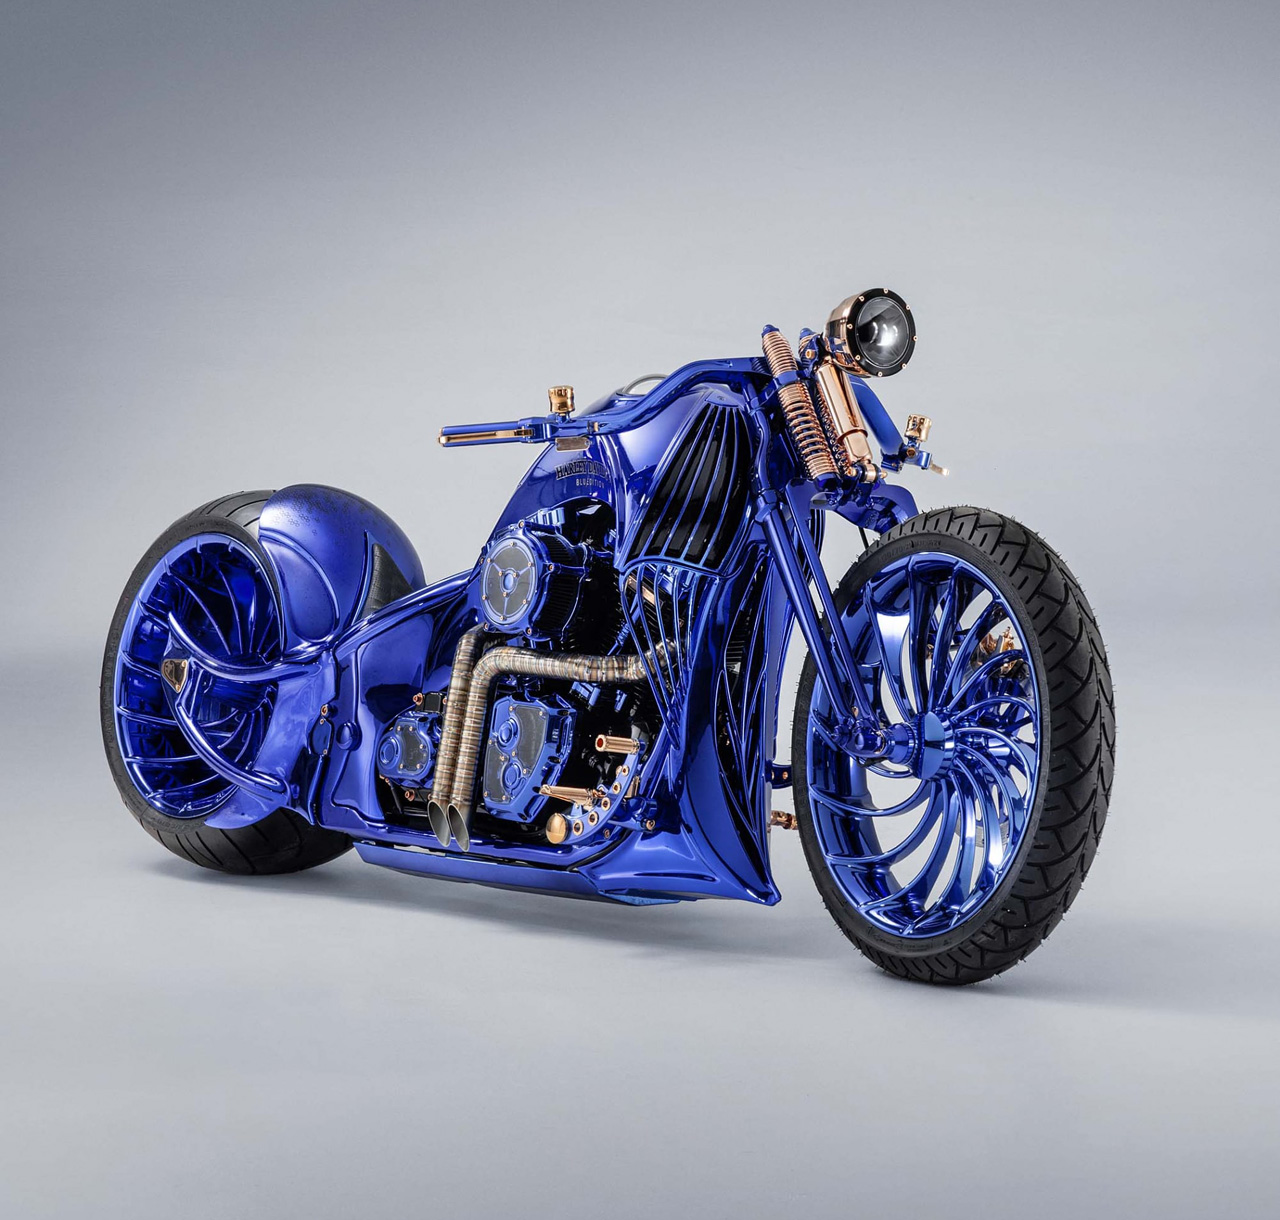 The Most Expensive Motorbike in the World – Harley-Davidson BLUE EDITION